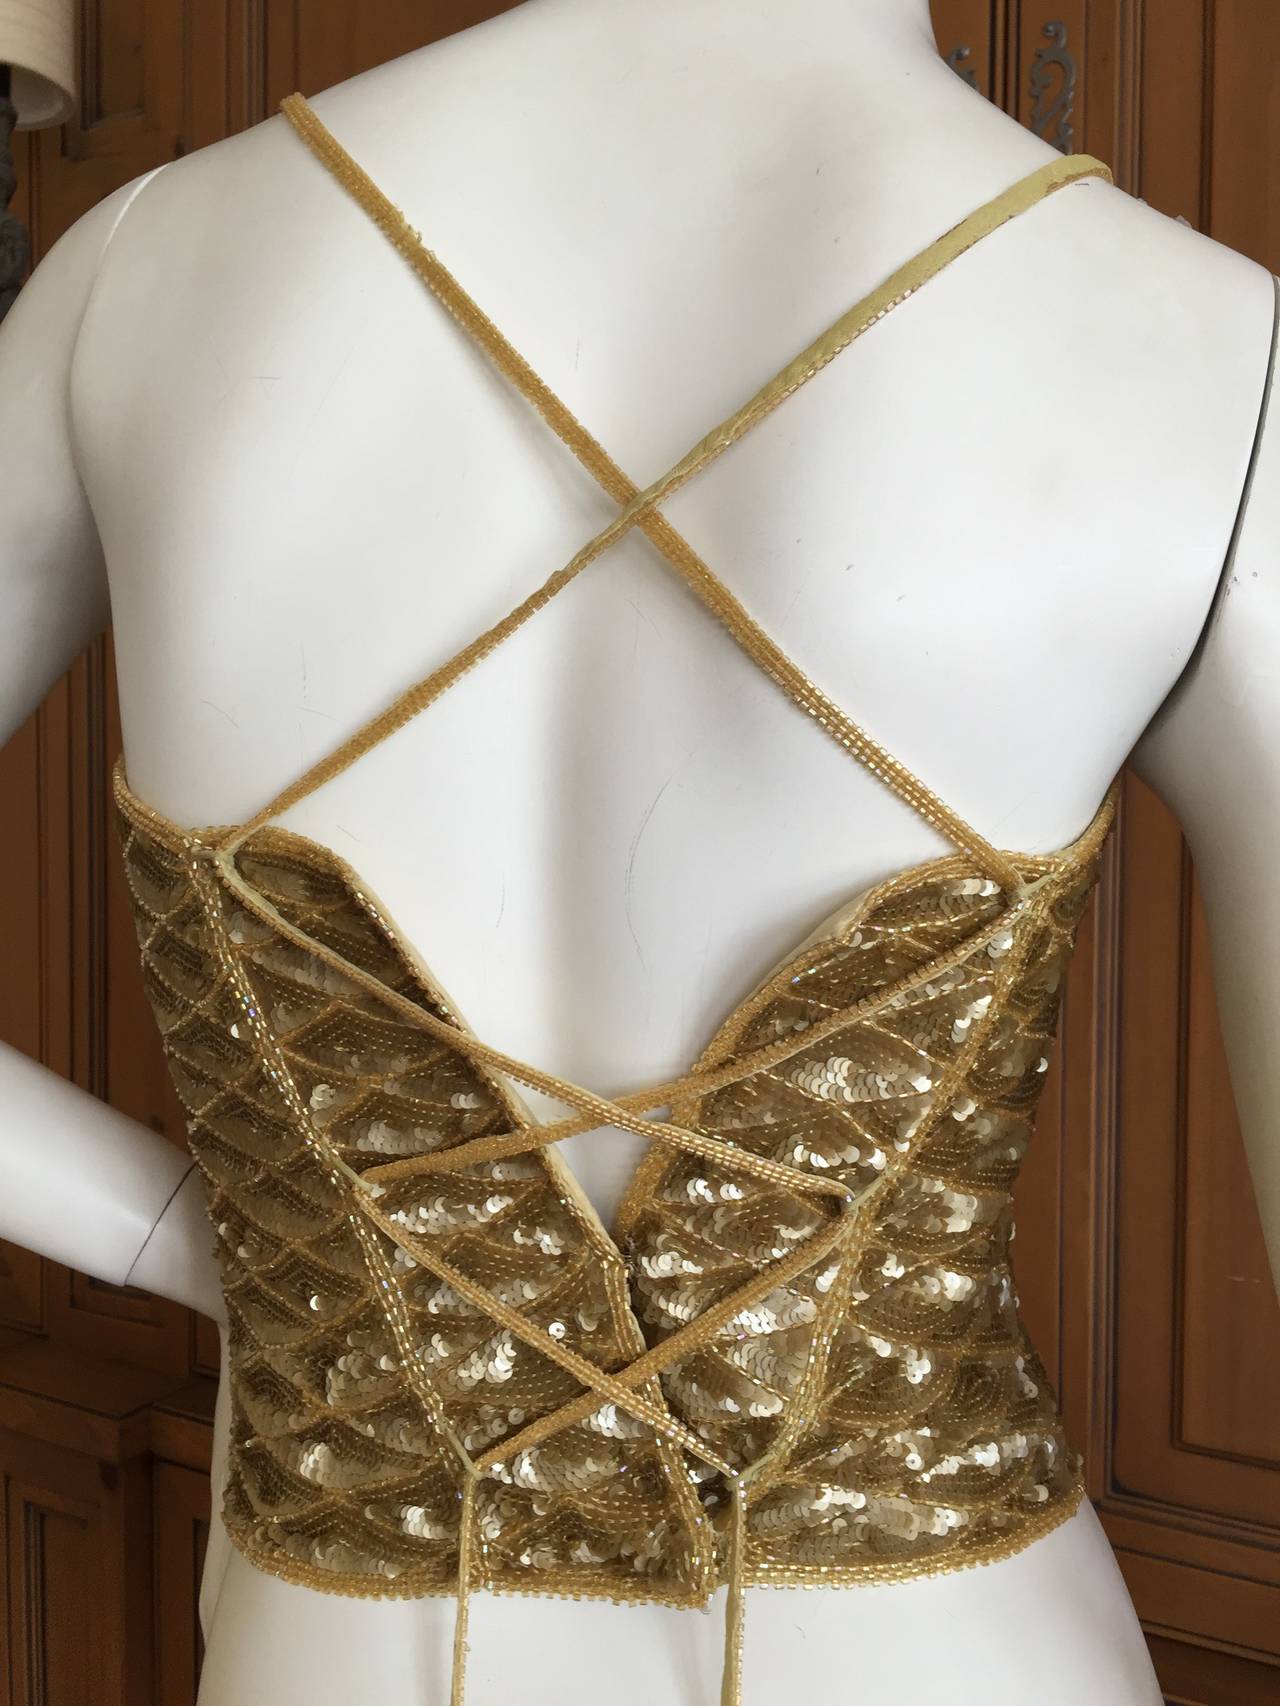 Ferragamo Vintage Gold Sequin Top w Corset Lace Back
This is so pretty in person.
Sz 40 
Bust 34"
Waist 25"
Length 15"